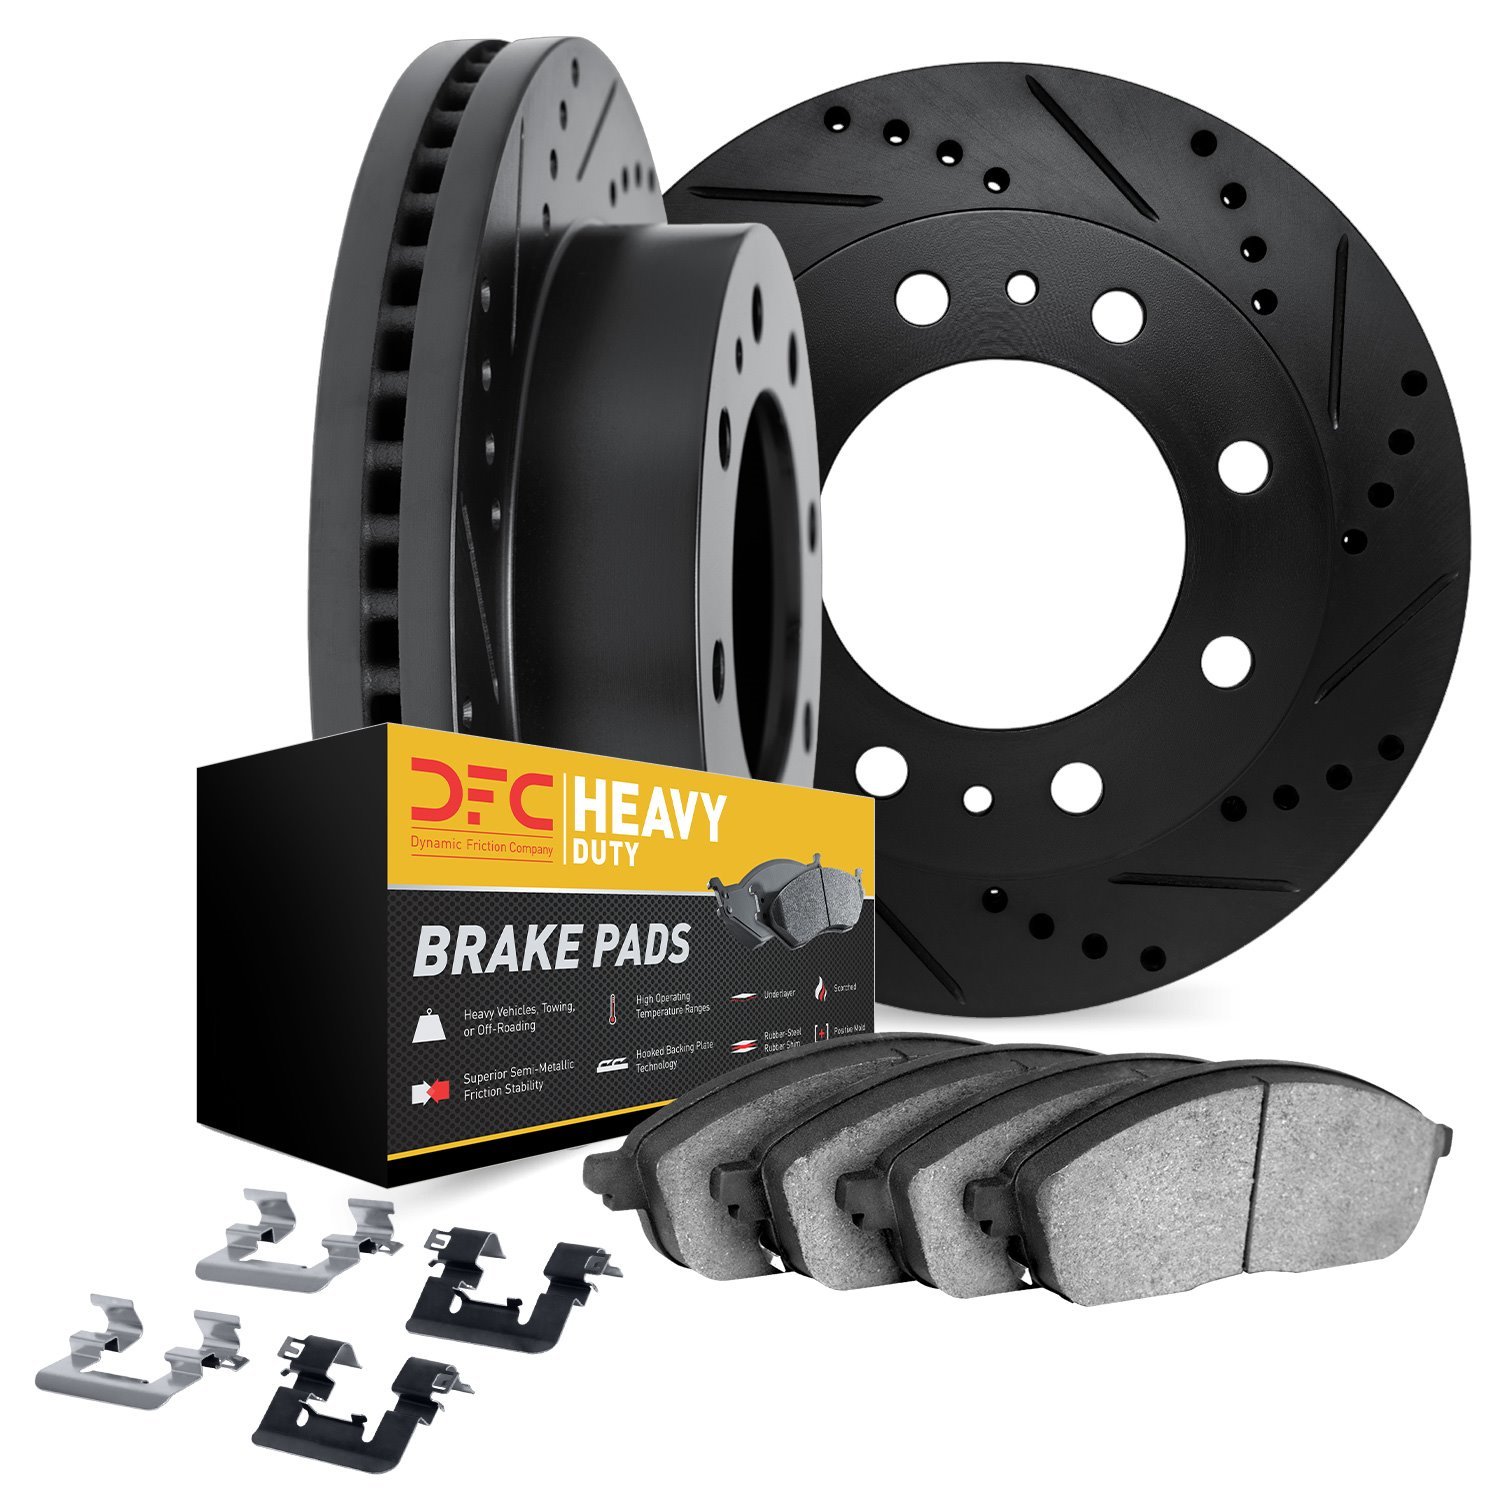 8212-99223 Drilled/Slotted Rotors w/Heavy-Duty Brake Pads Kit & Hardware [Black], Fits Select Ford/Lincoln/Mercury/Mazda, Positi